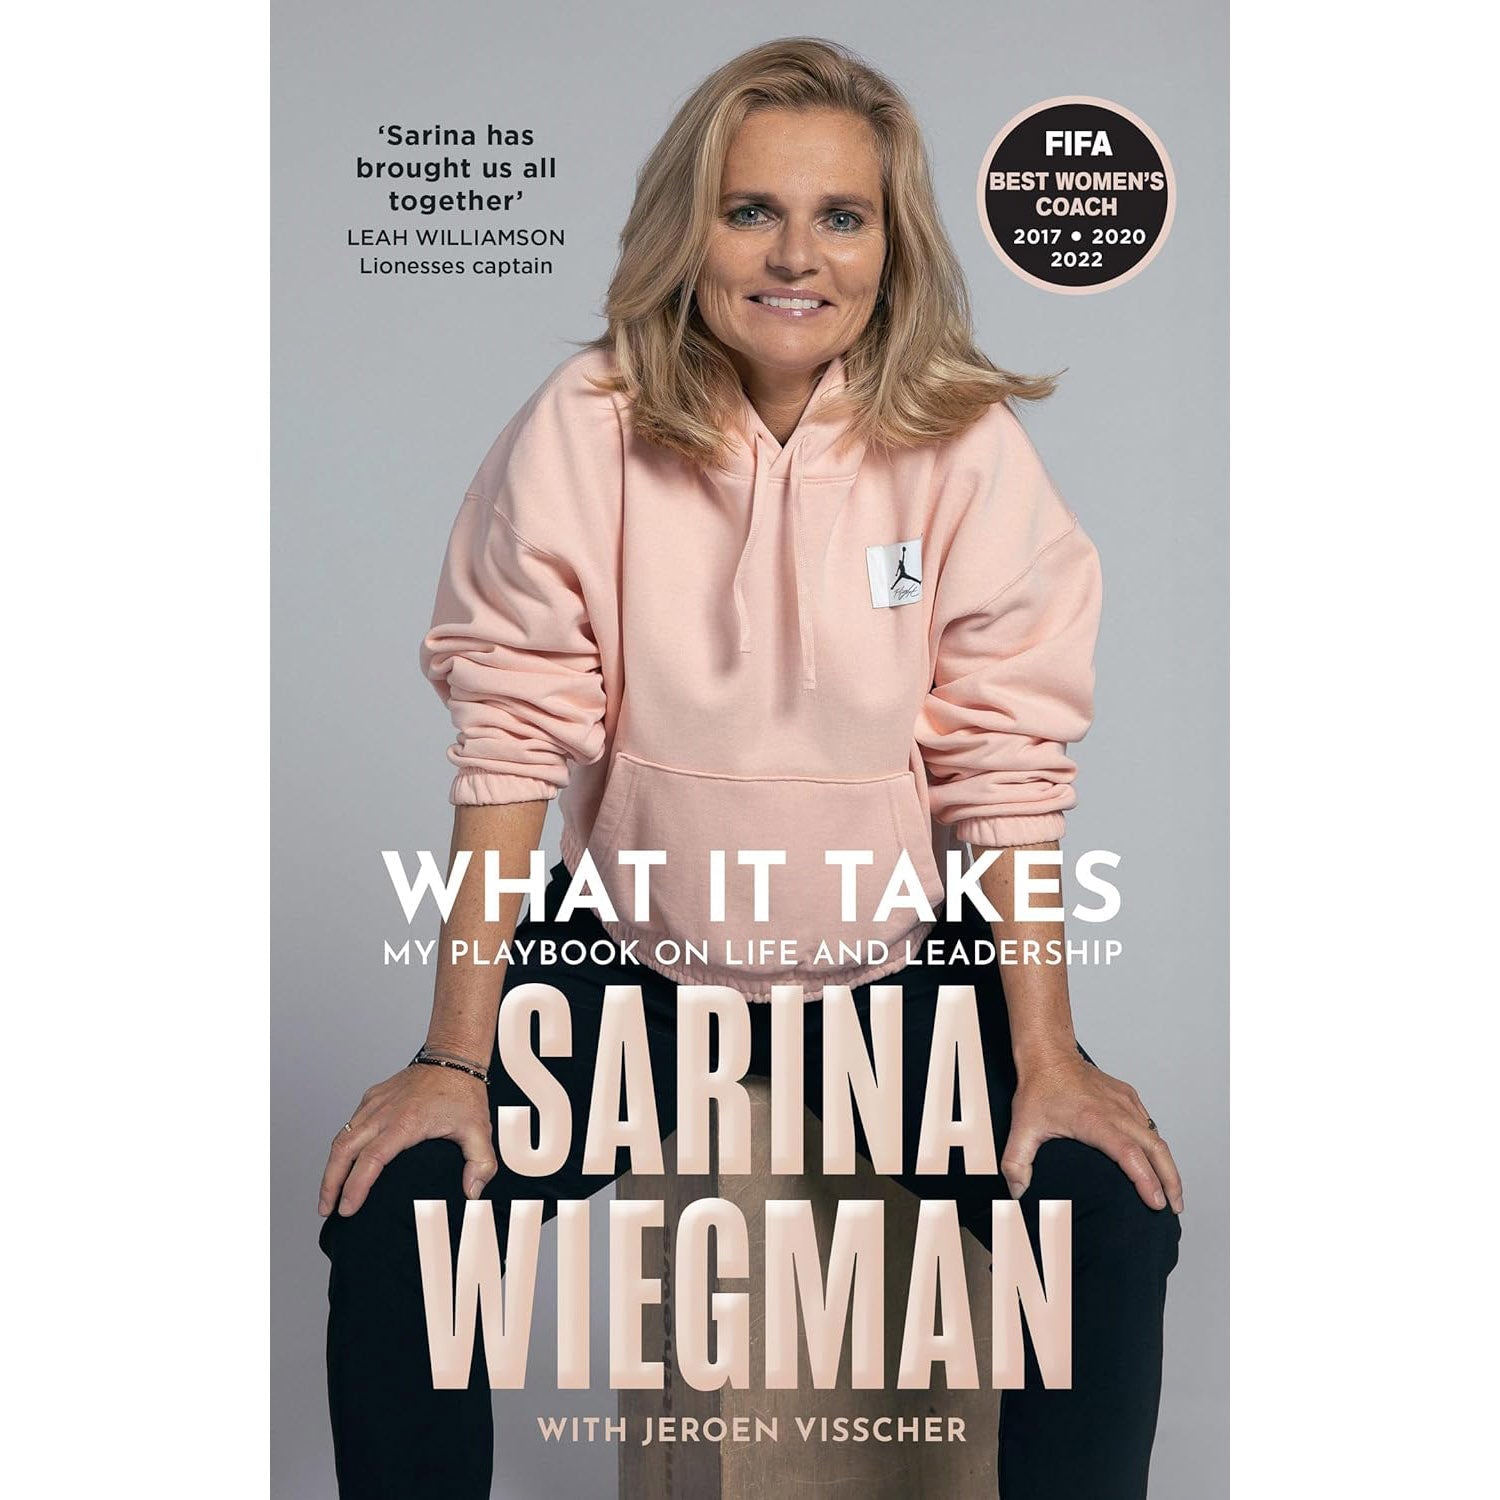 Sarina Wiegman – What It Takes – My Playbook on Life and Leadership